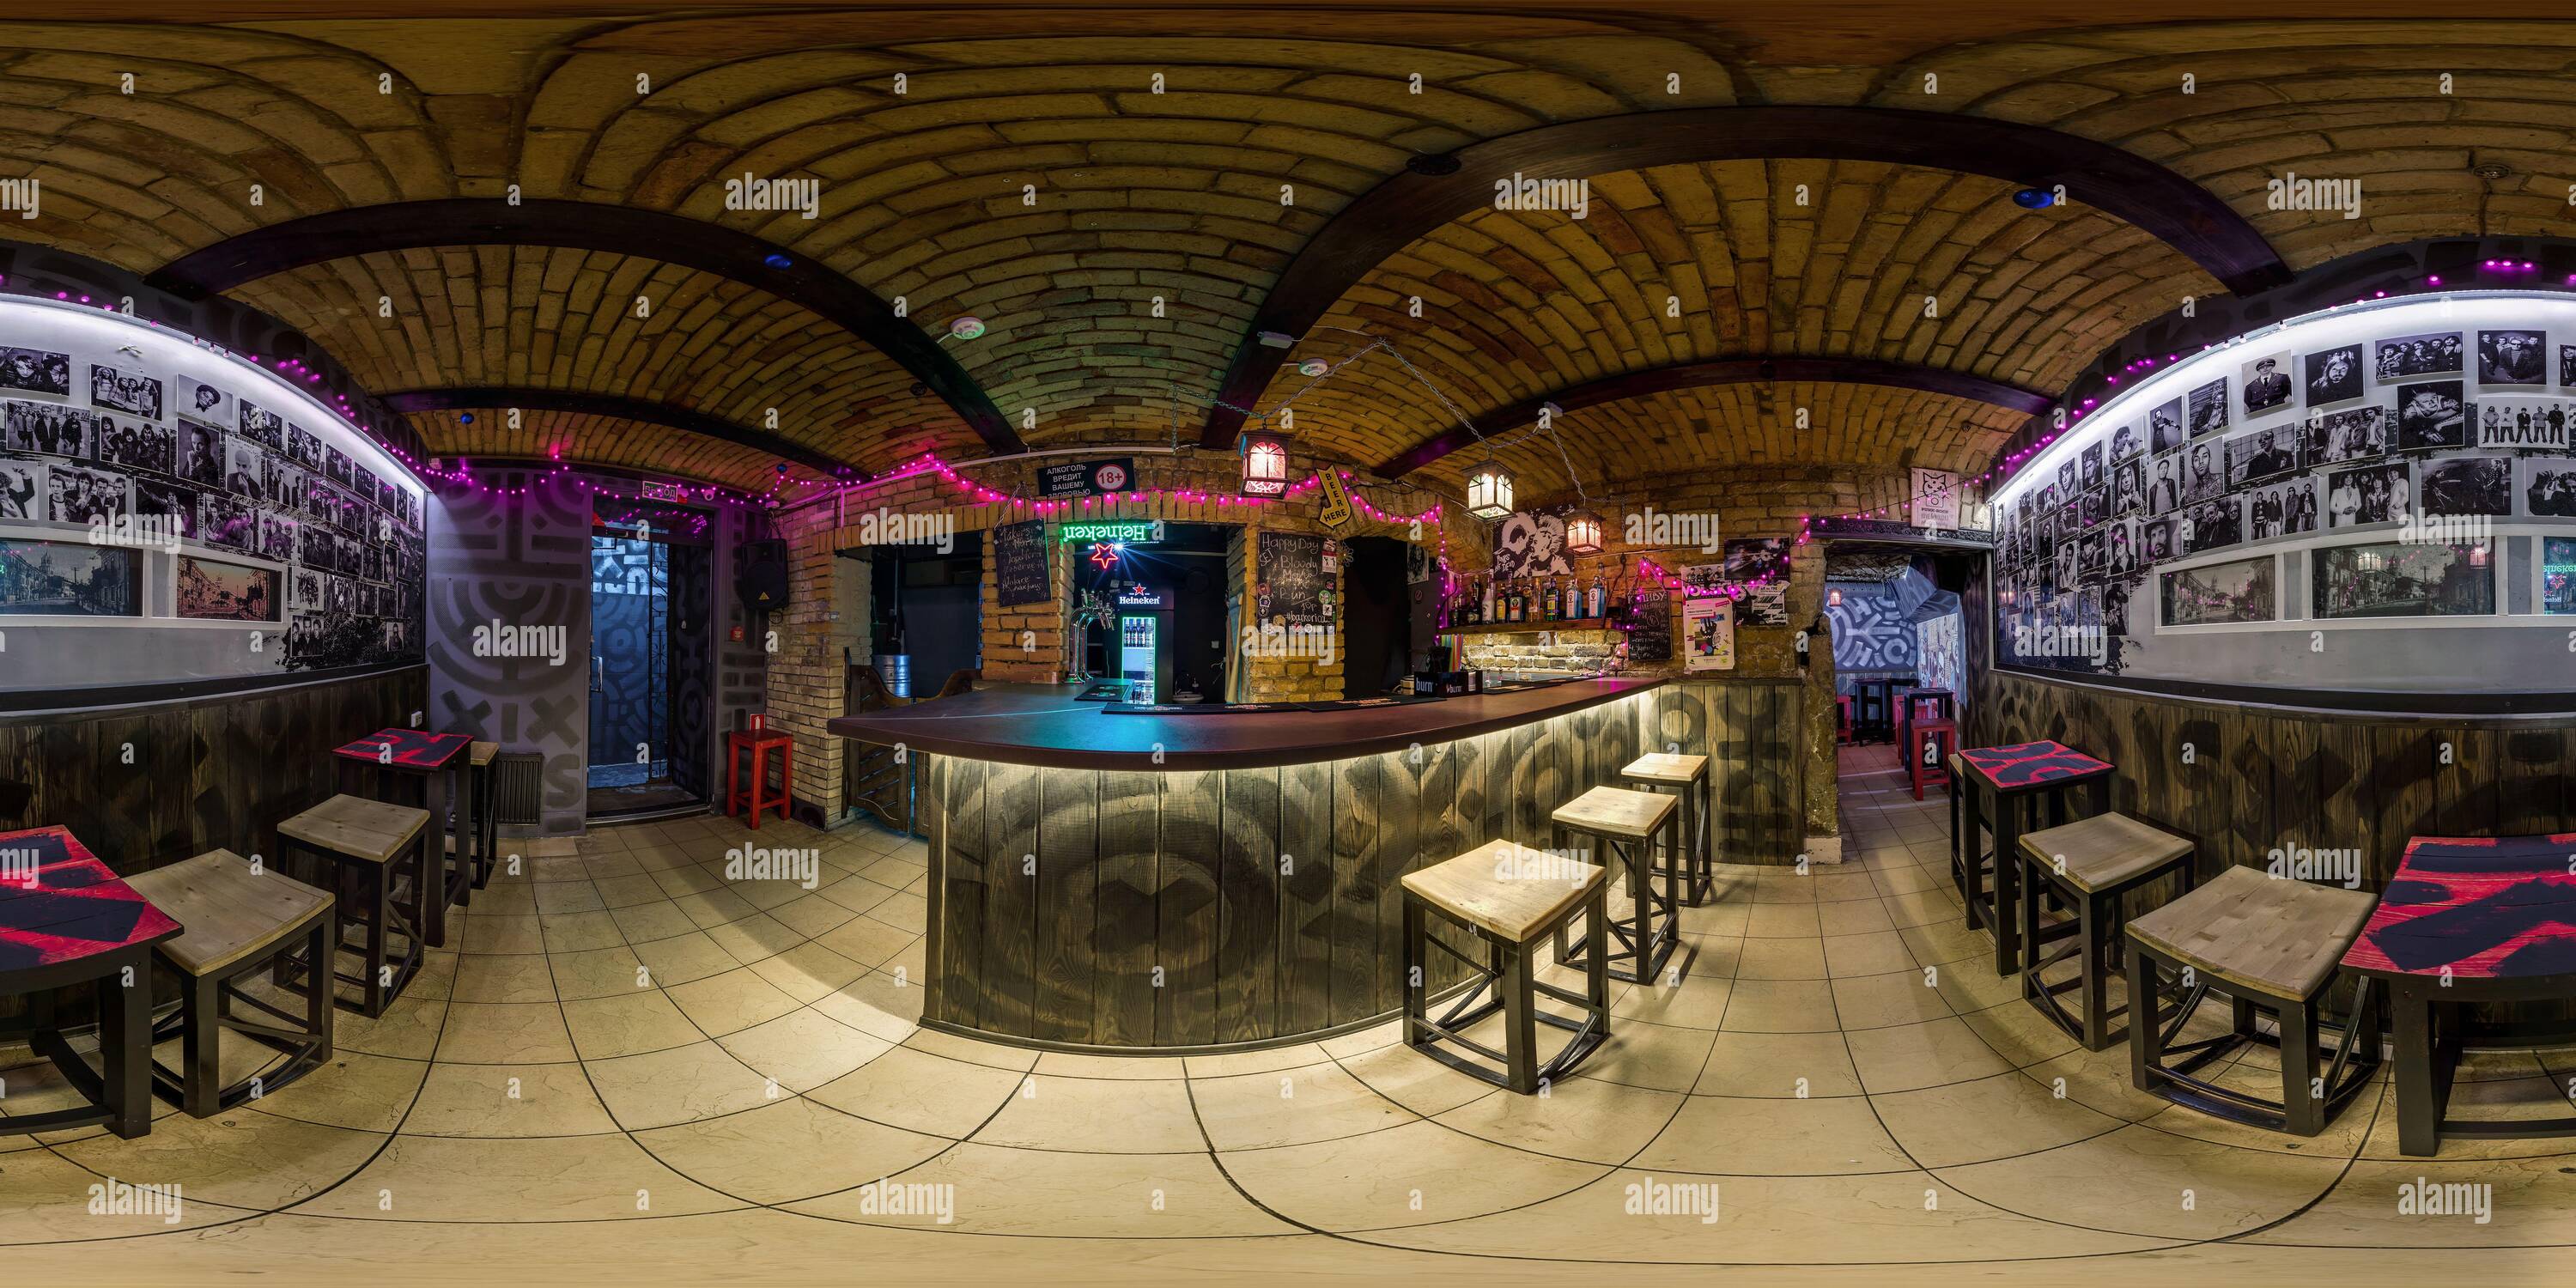 360 degree panoramic view of GRODNO, BELARUS - NOVEMBER, 2018: Full spherical seamless panorama 360 degrees in interior stylish nightclub bar in basement with arches in equirectan